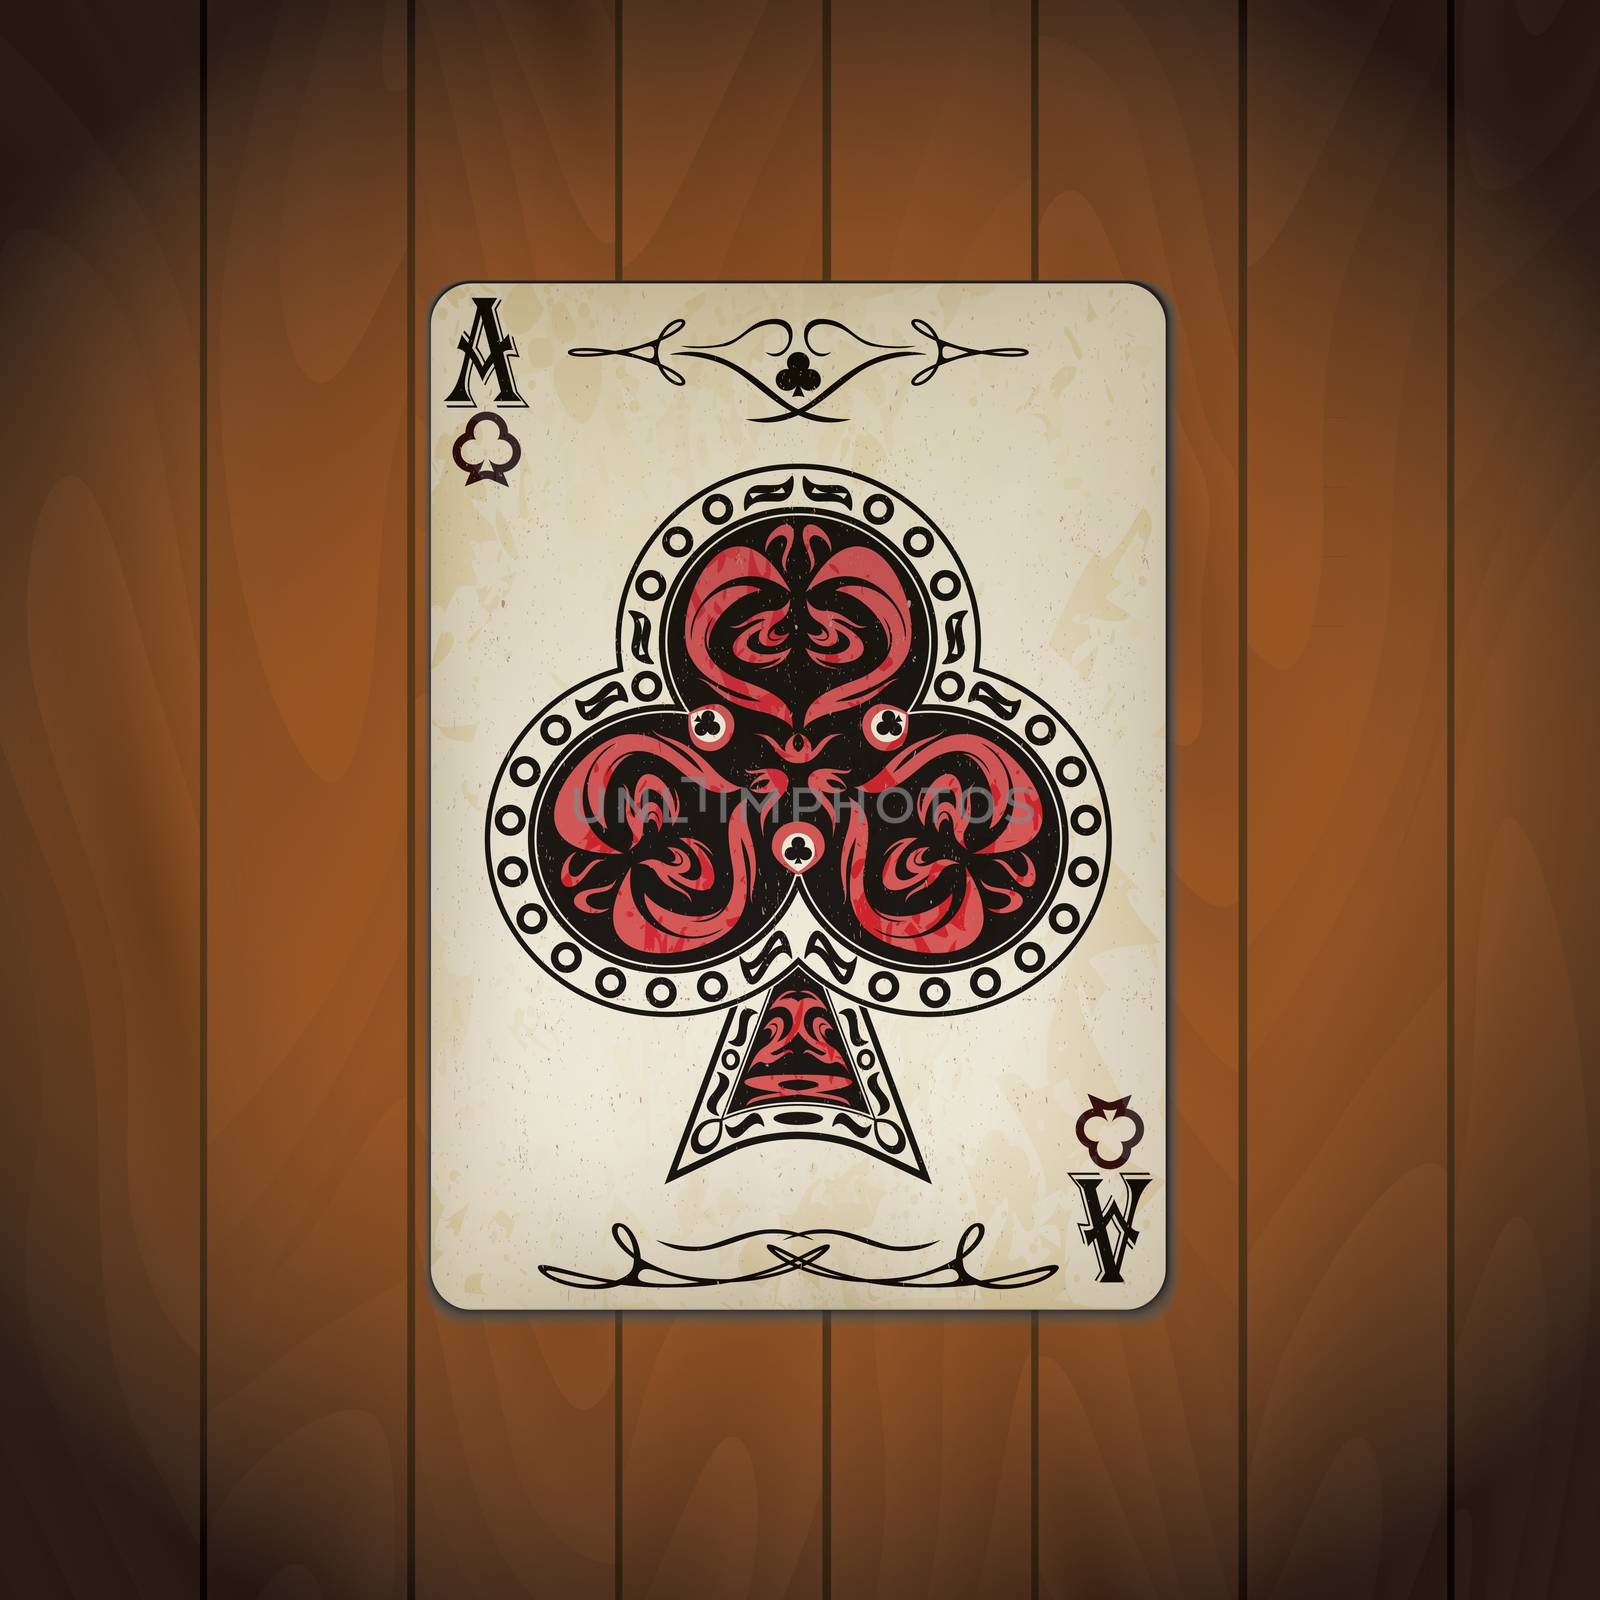 Ace of clubs poker cards old look varnished wood background.